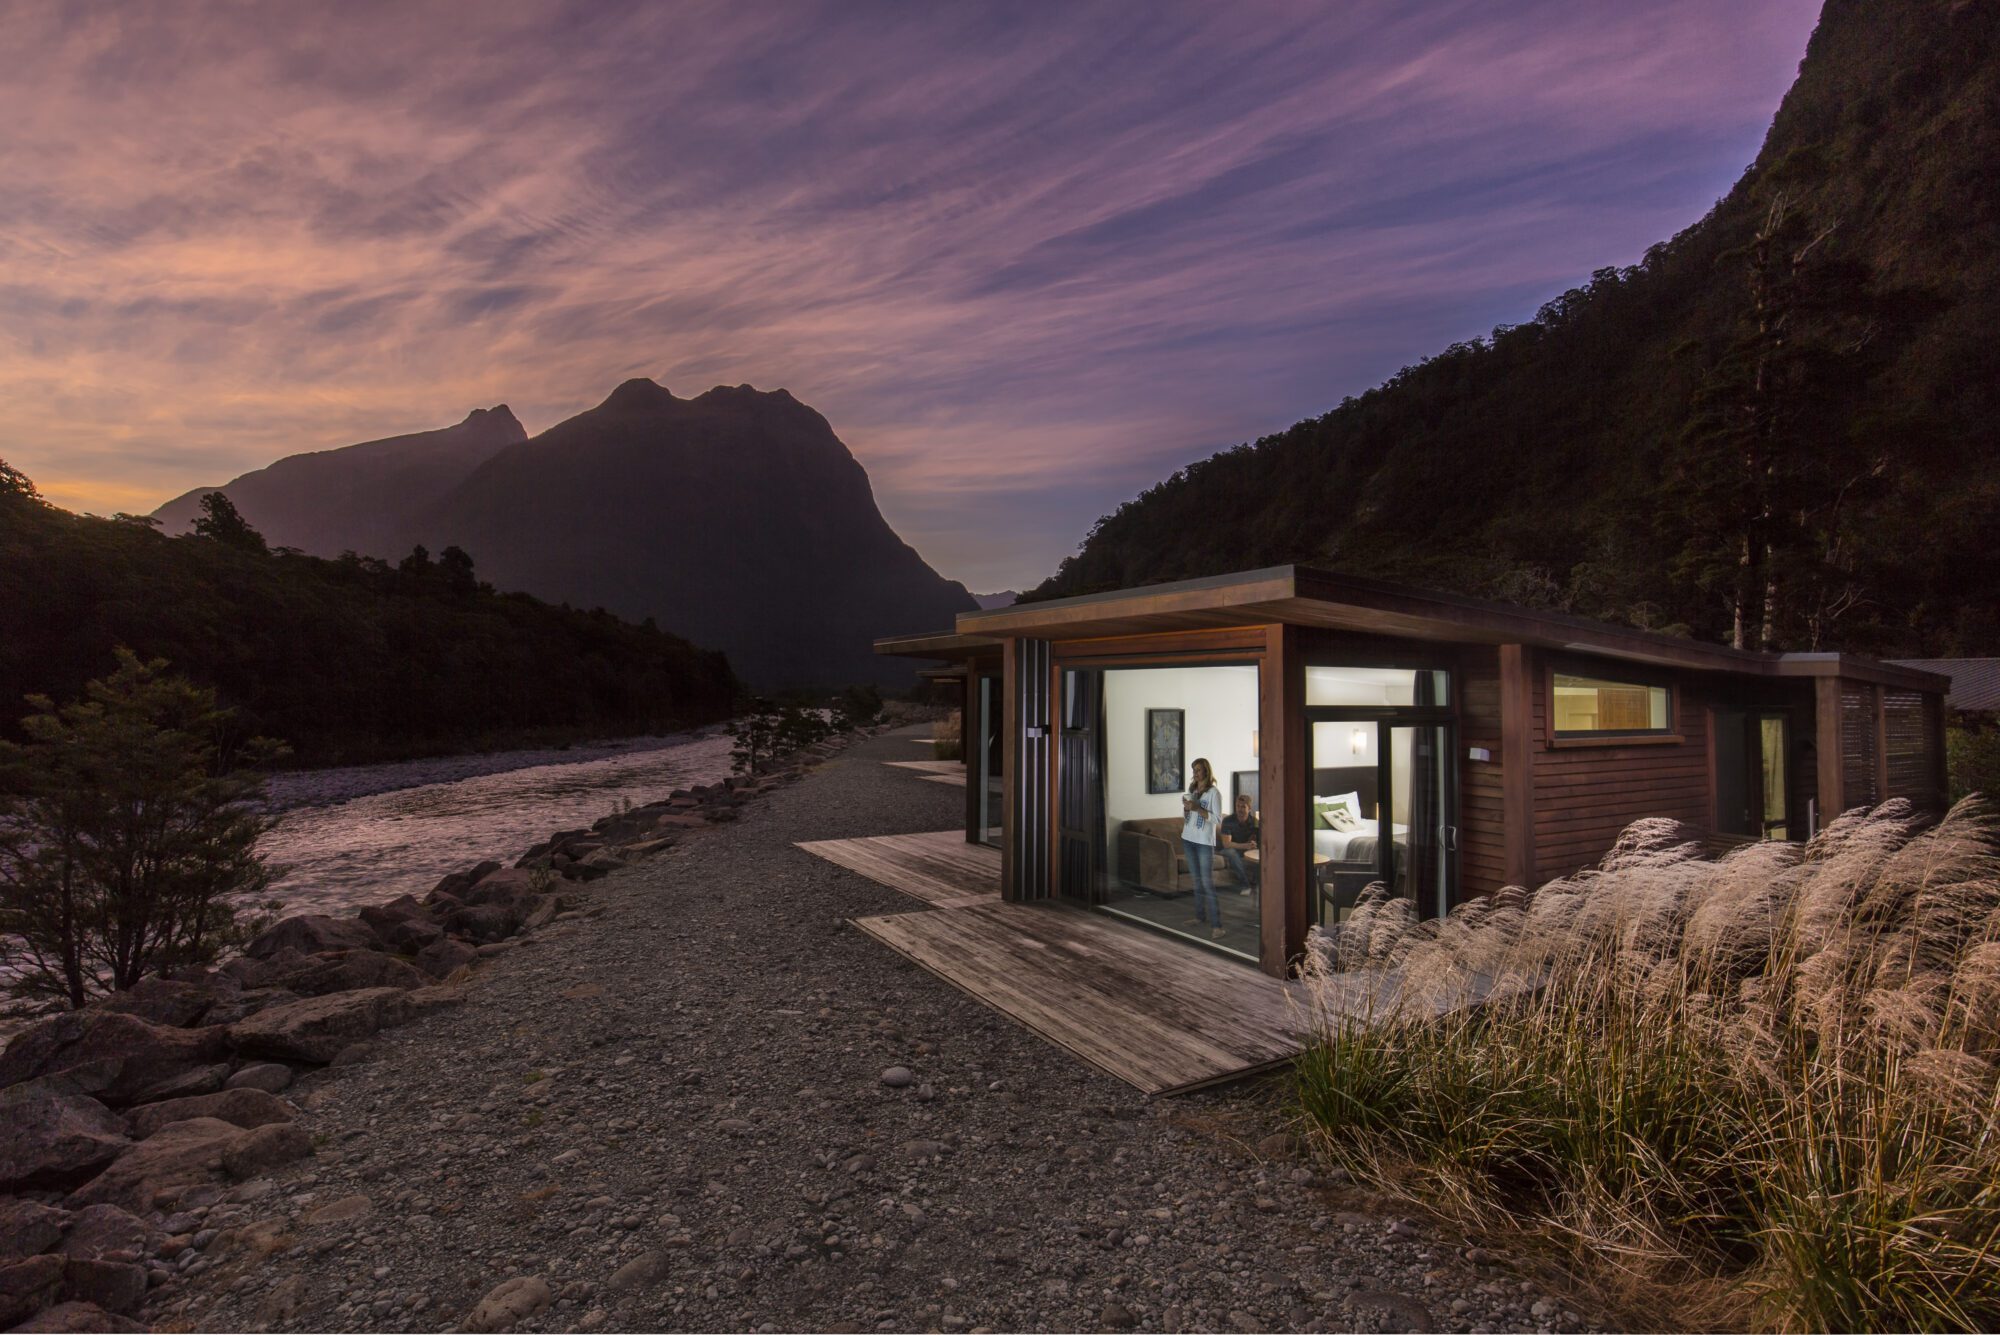 Luxury awaits: The most stunning boutique hotels, villas and lodges in New Zealand